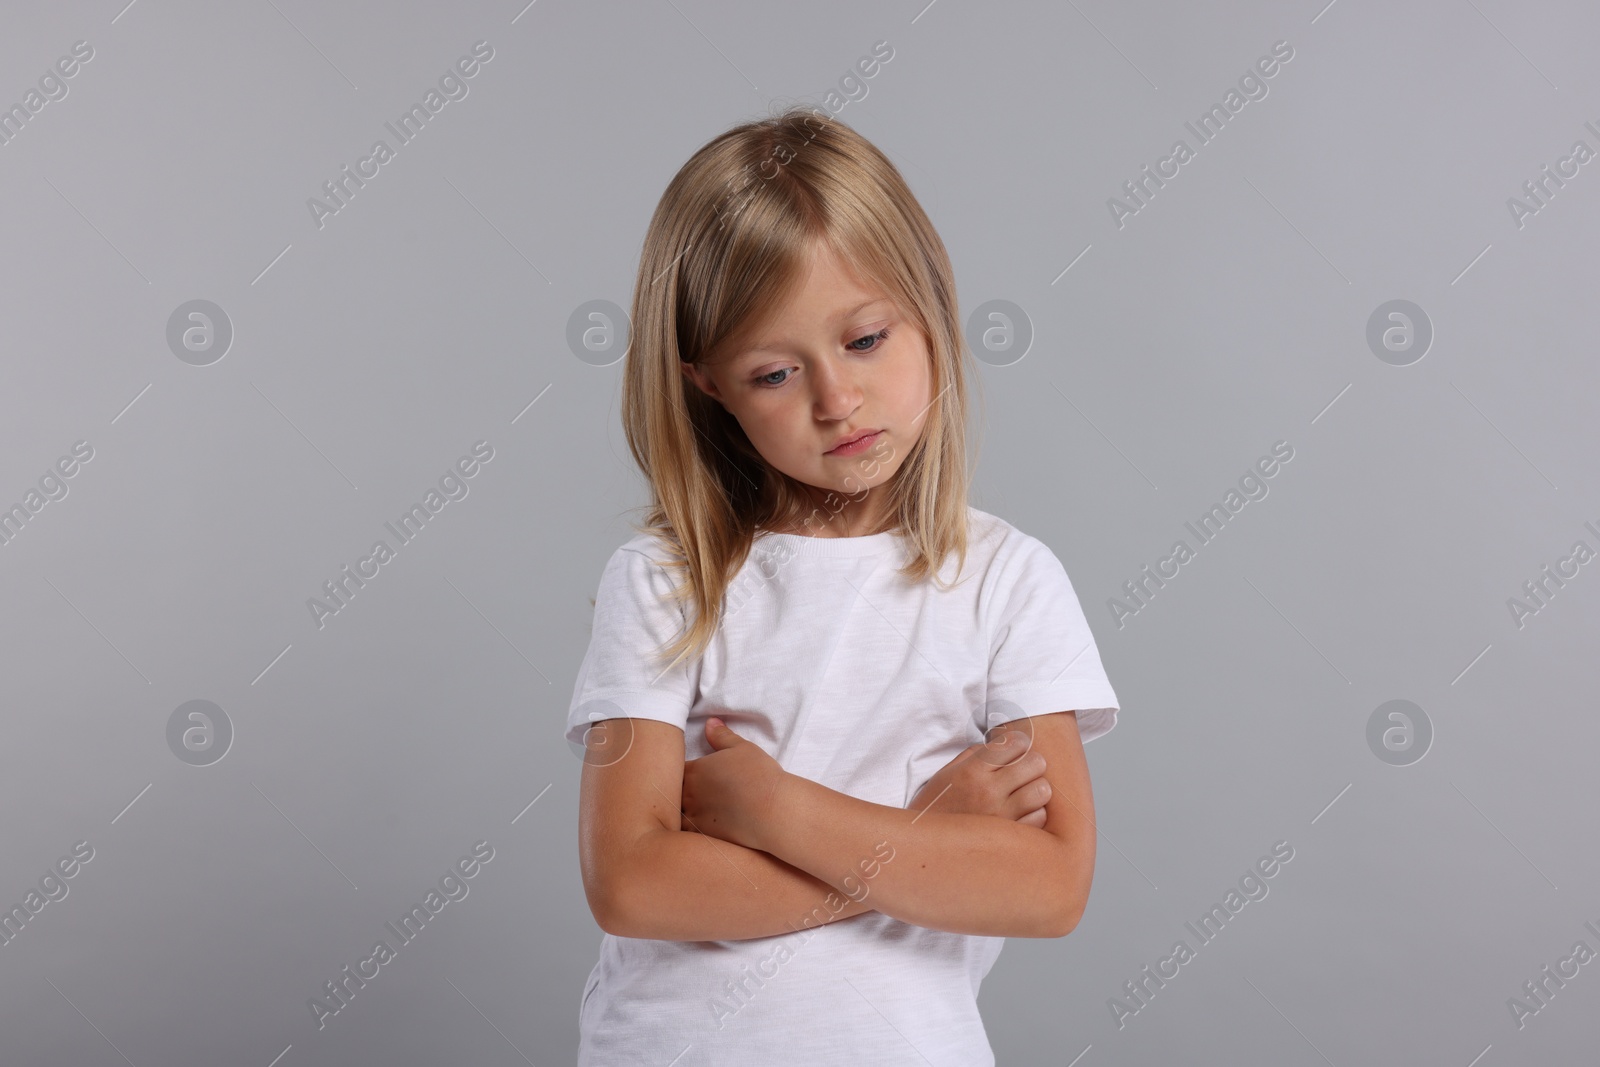 Photo of Resentful girl with crossed arms on grey background